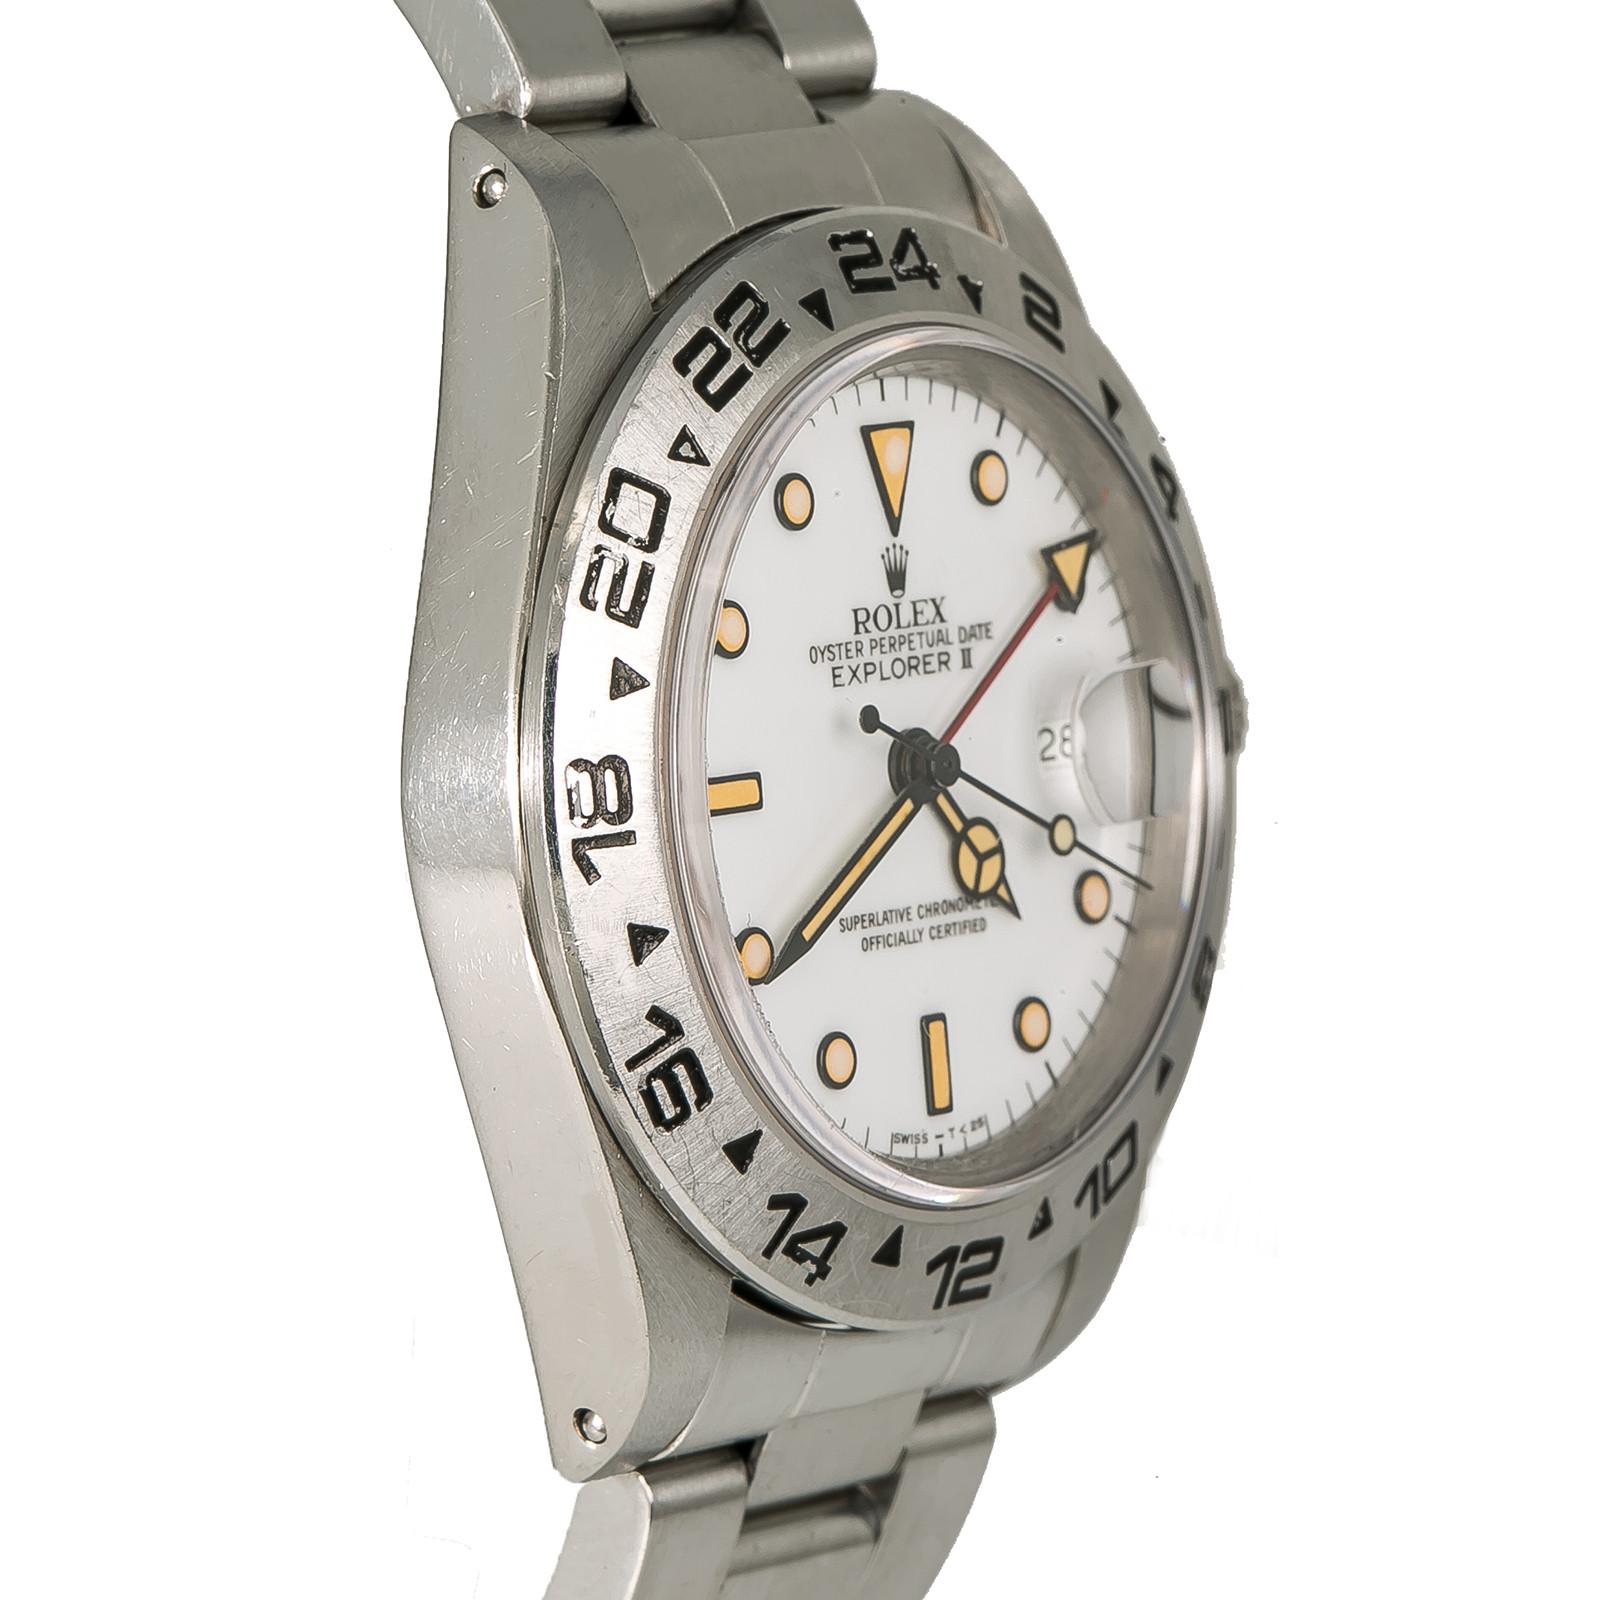 Rolex Explorer II12600, Dial Certified Authentic In Good Condition For Sale In Miami, FL